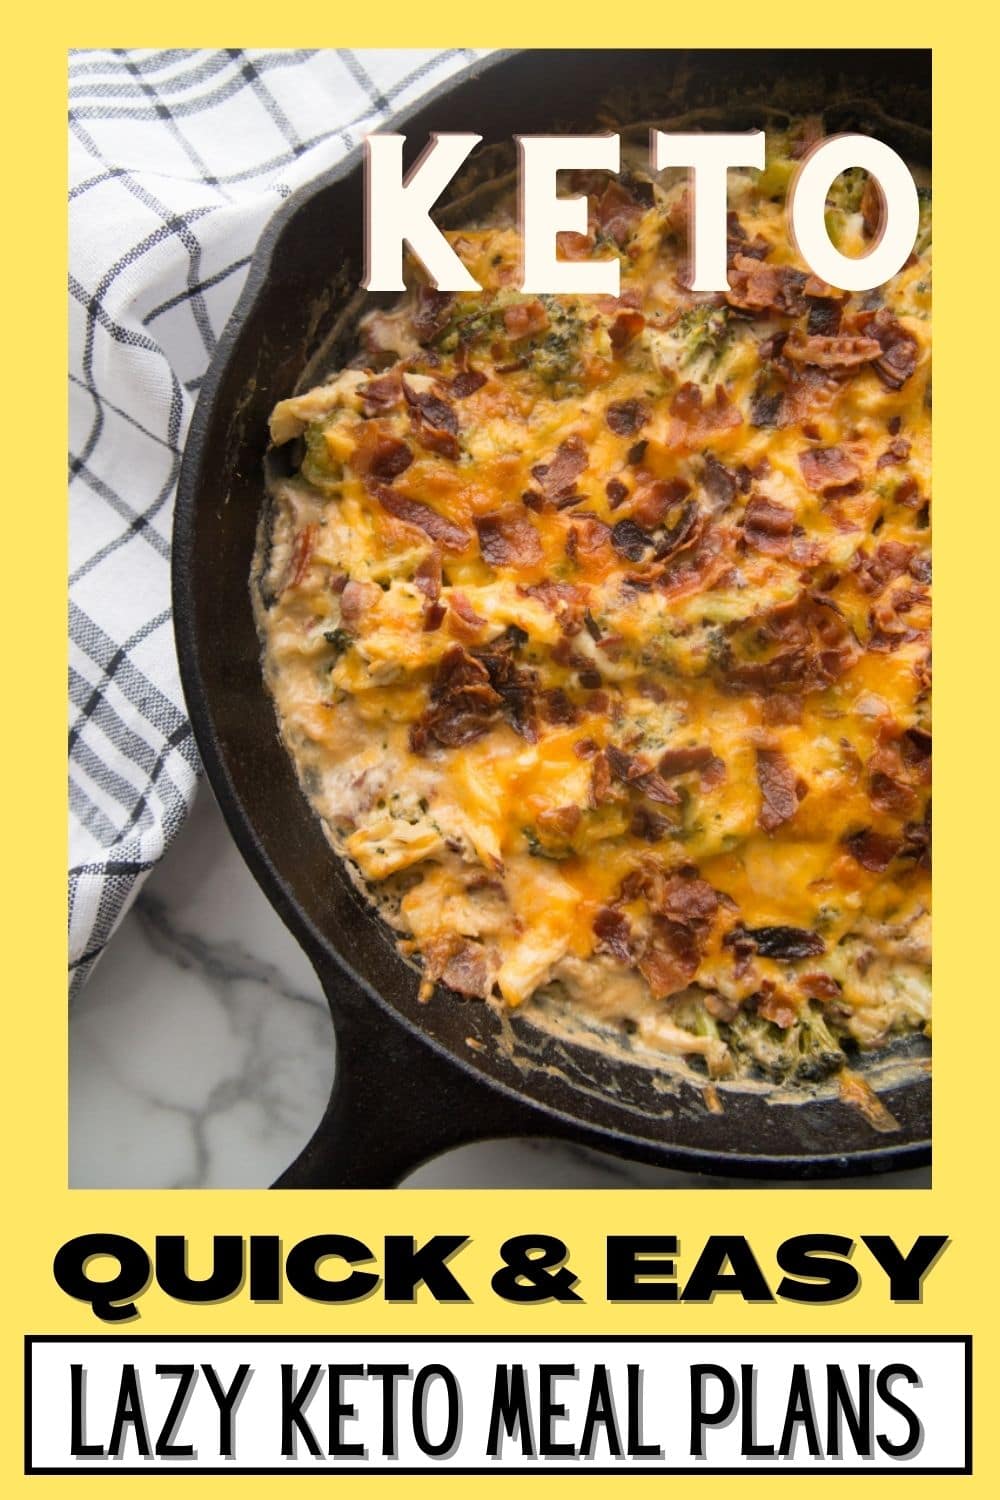 Keto Meal Plan Graphic with a cast iron skillet meal